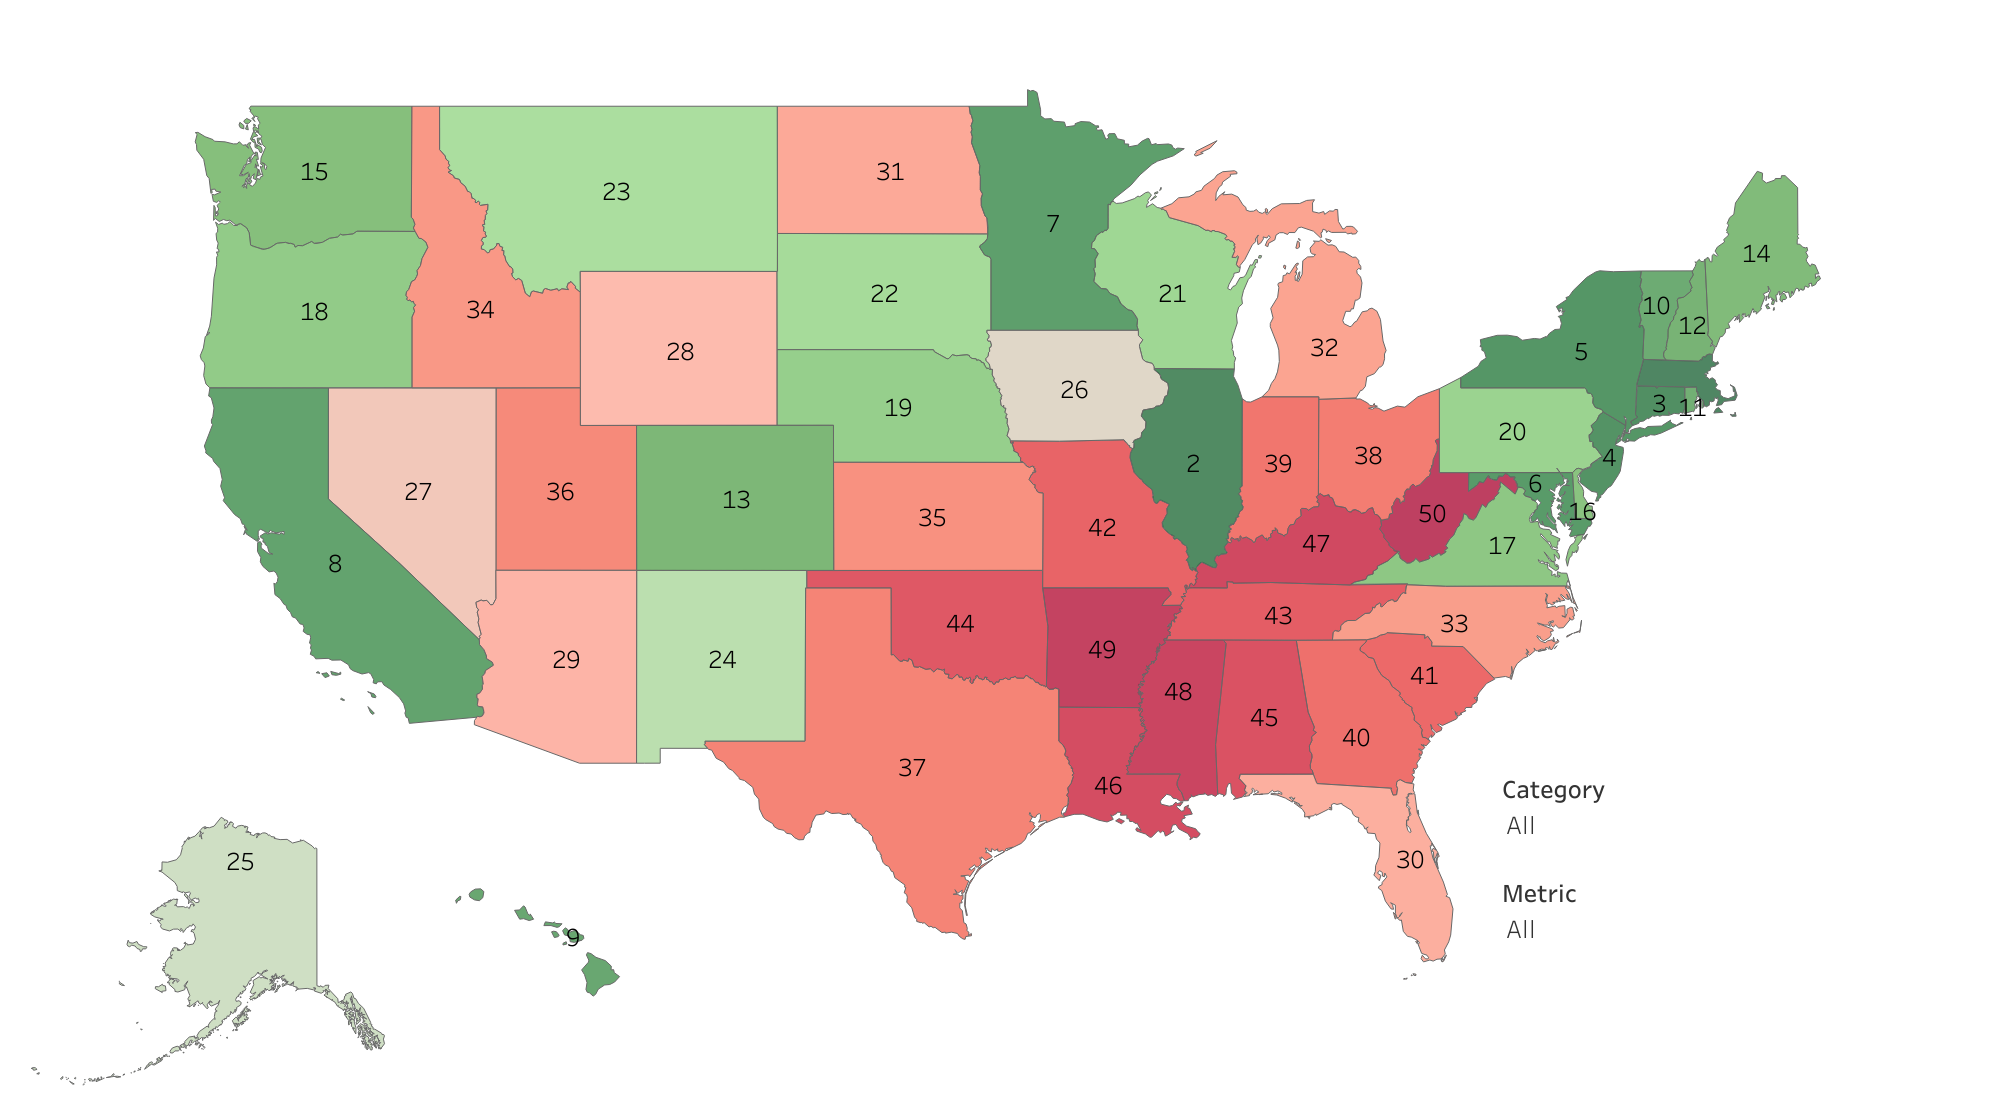 happiness ratings for each state shown on U.S. map...